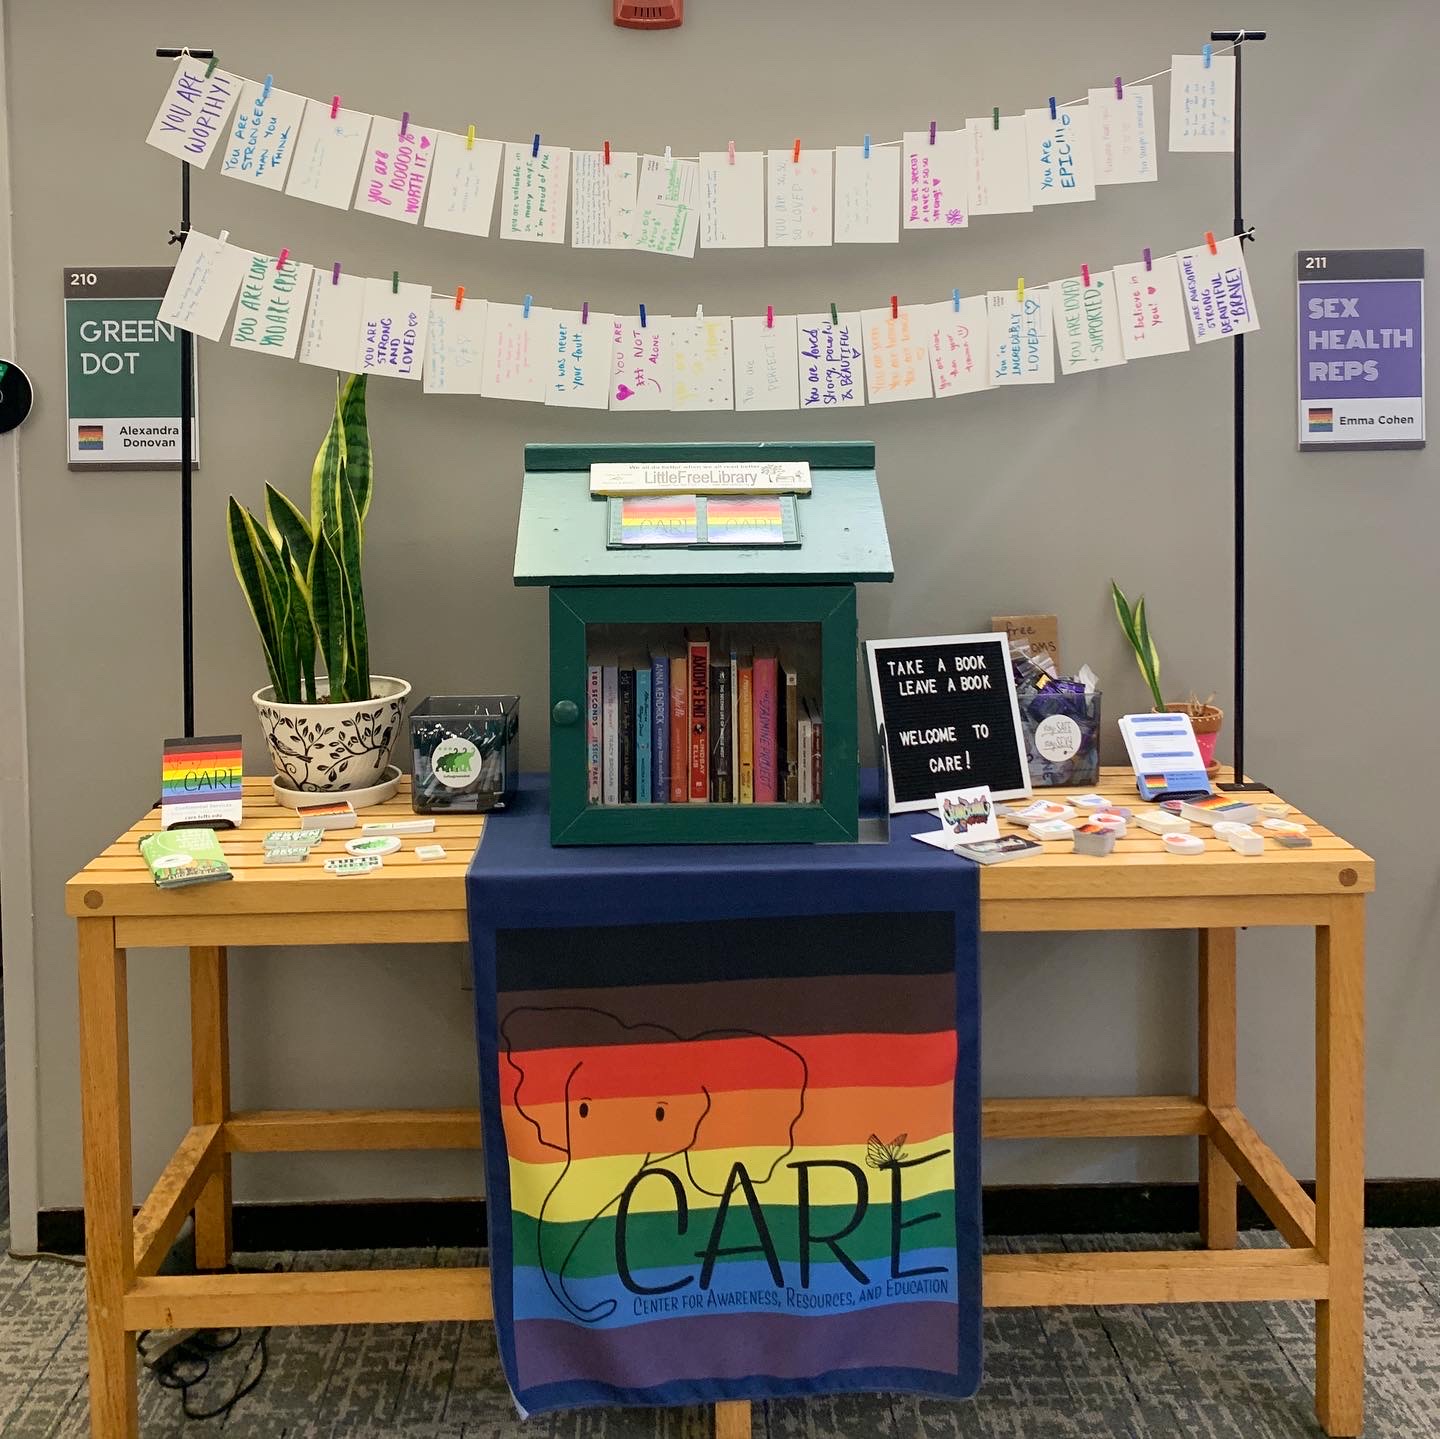 Wooden table with a rainbow sign saying CARE hanging from it. On the table is a green wooden library and two snake plants.